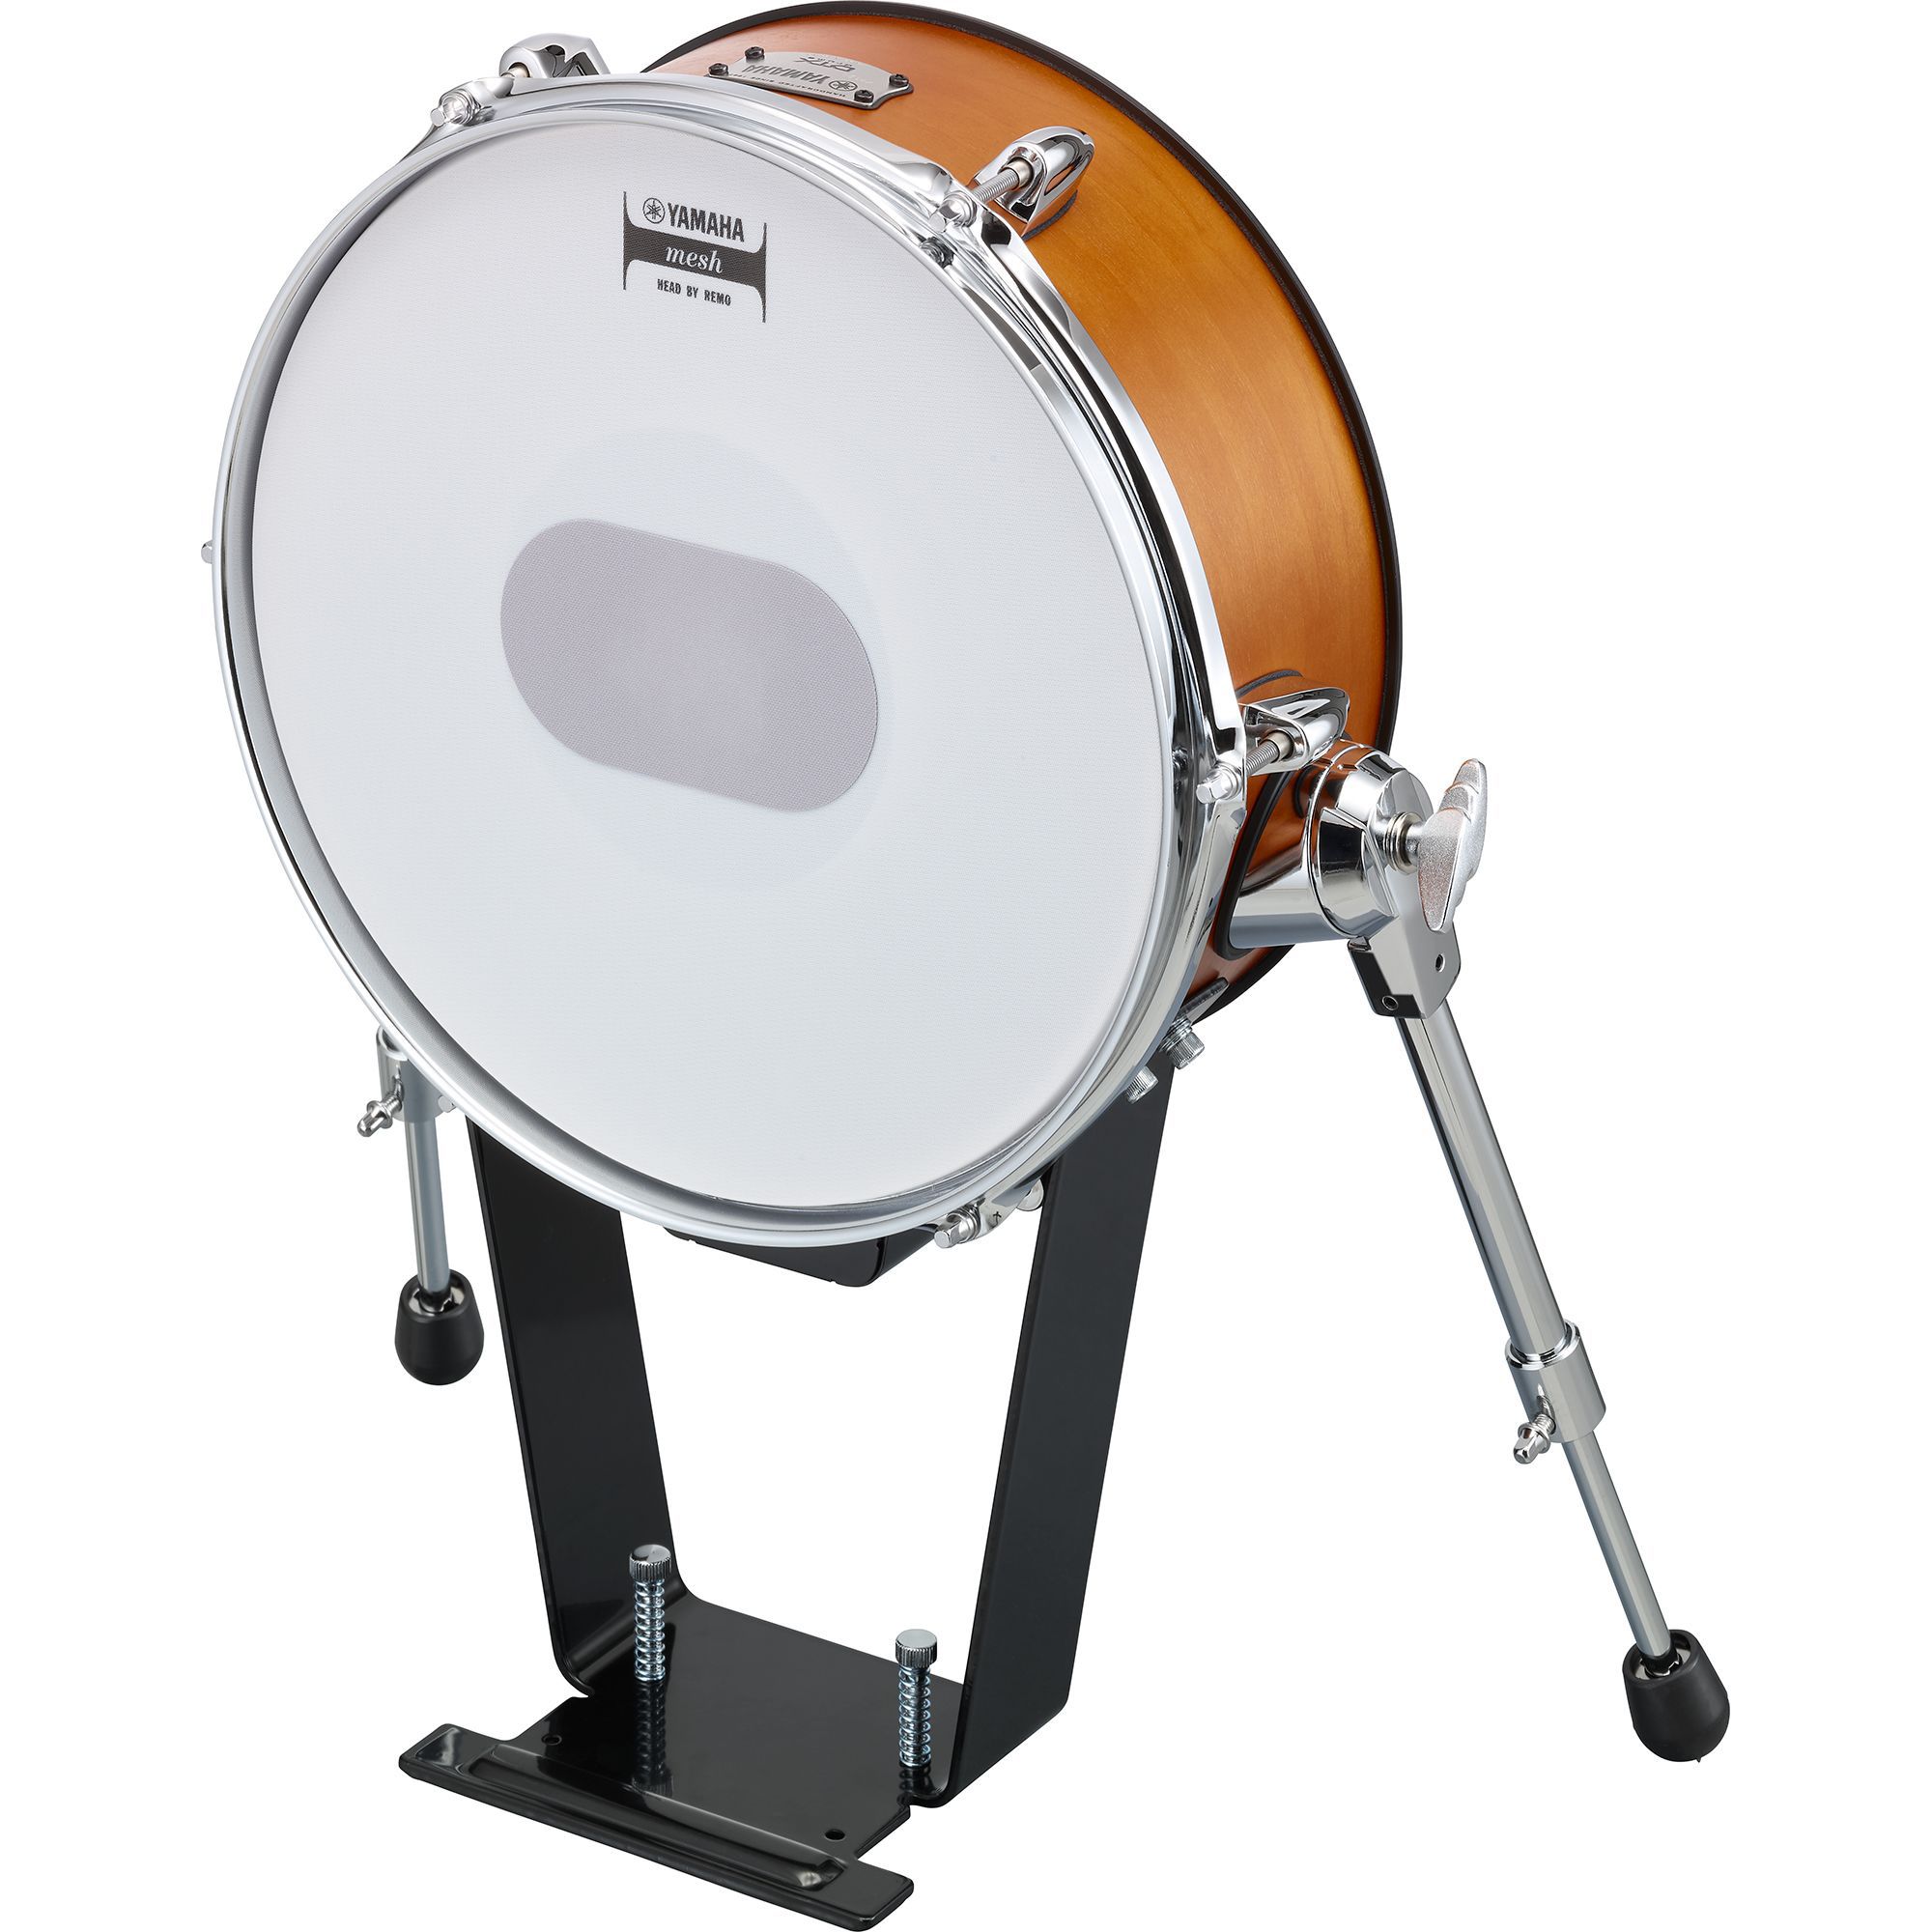 DTX10 Series Electronic Drum Kit Products - Yamaha USA